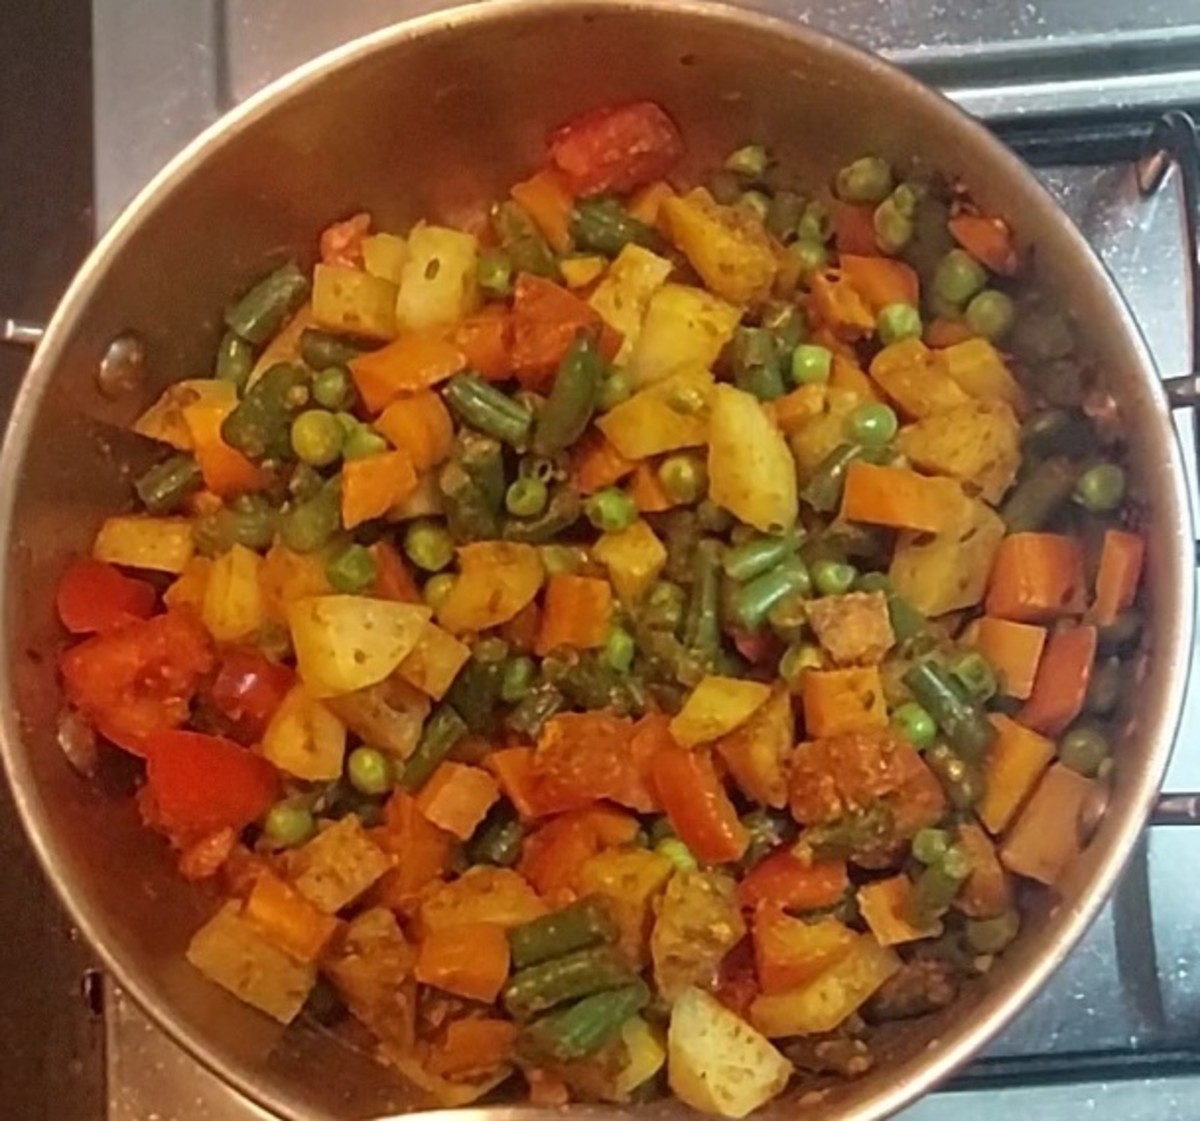 Mix well to combine vegetables with spices powders.